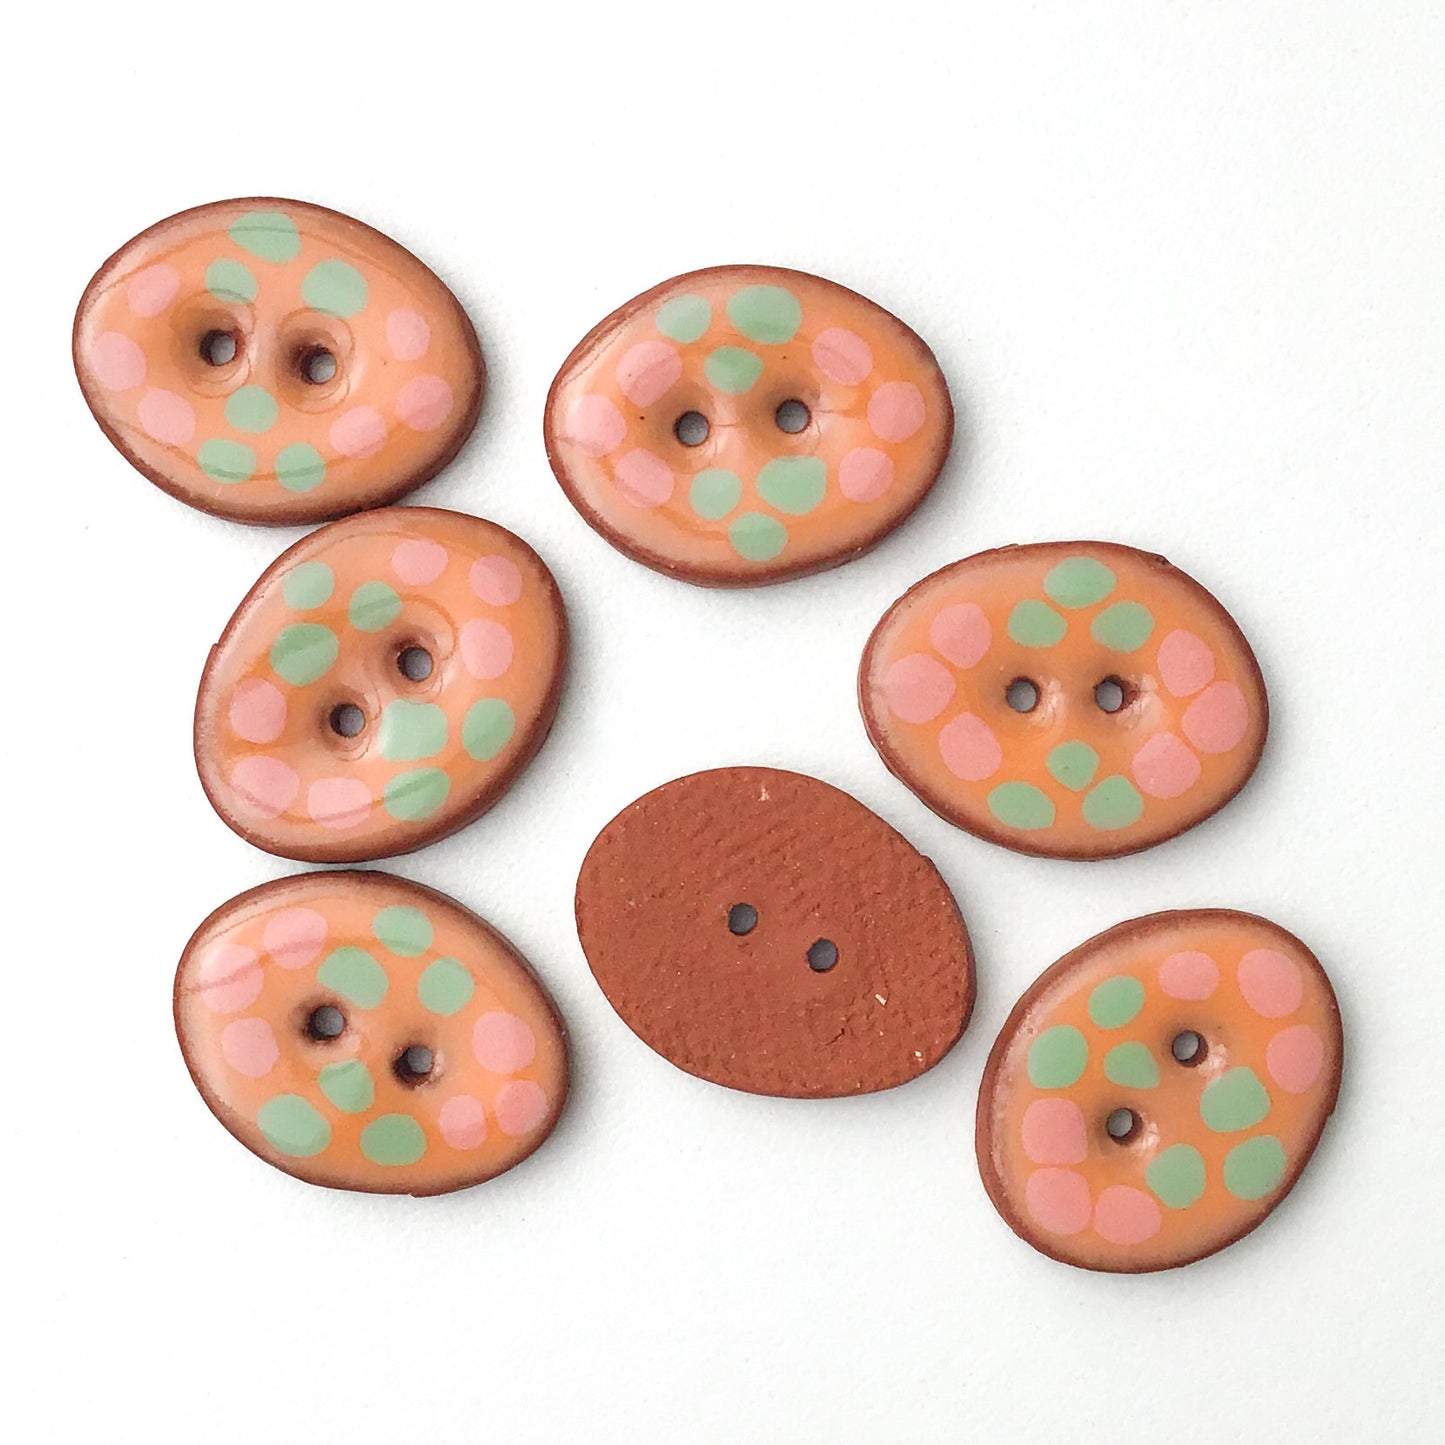 Decorative Oval Ceramic Buttons - Sorbet Orange with Salmon Pink + Mint Green Dot Pattern - 5/8" x 7/8" - 7 Pack